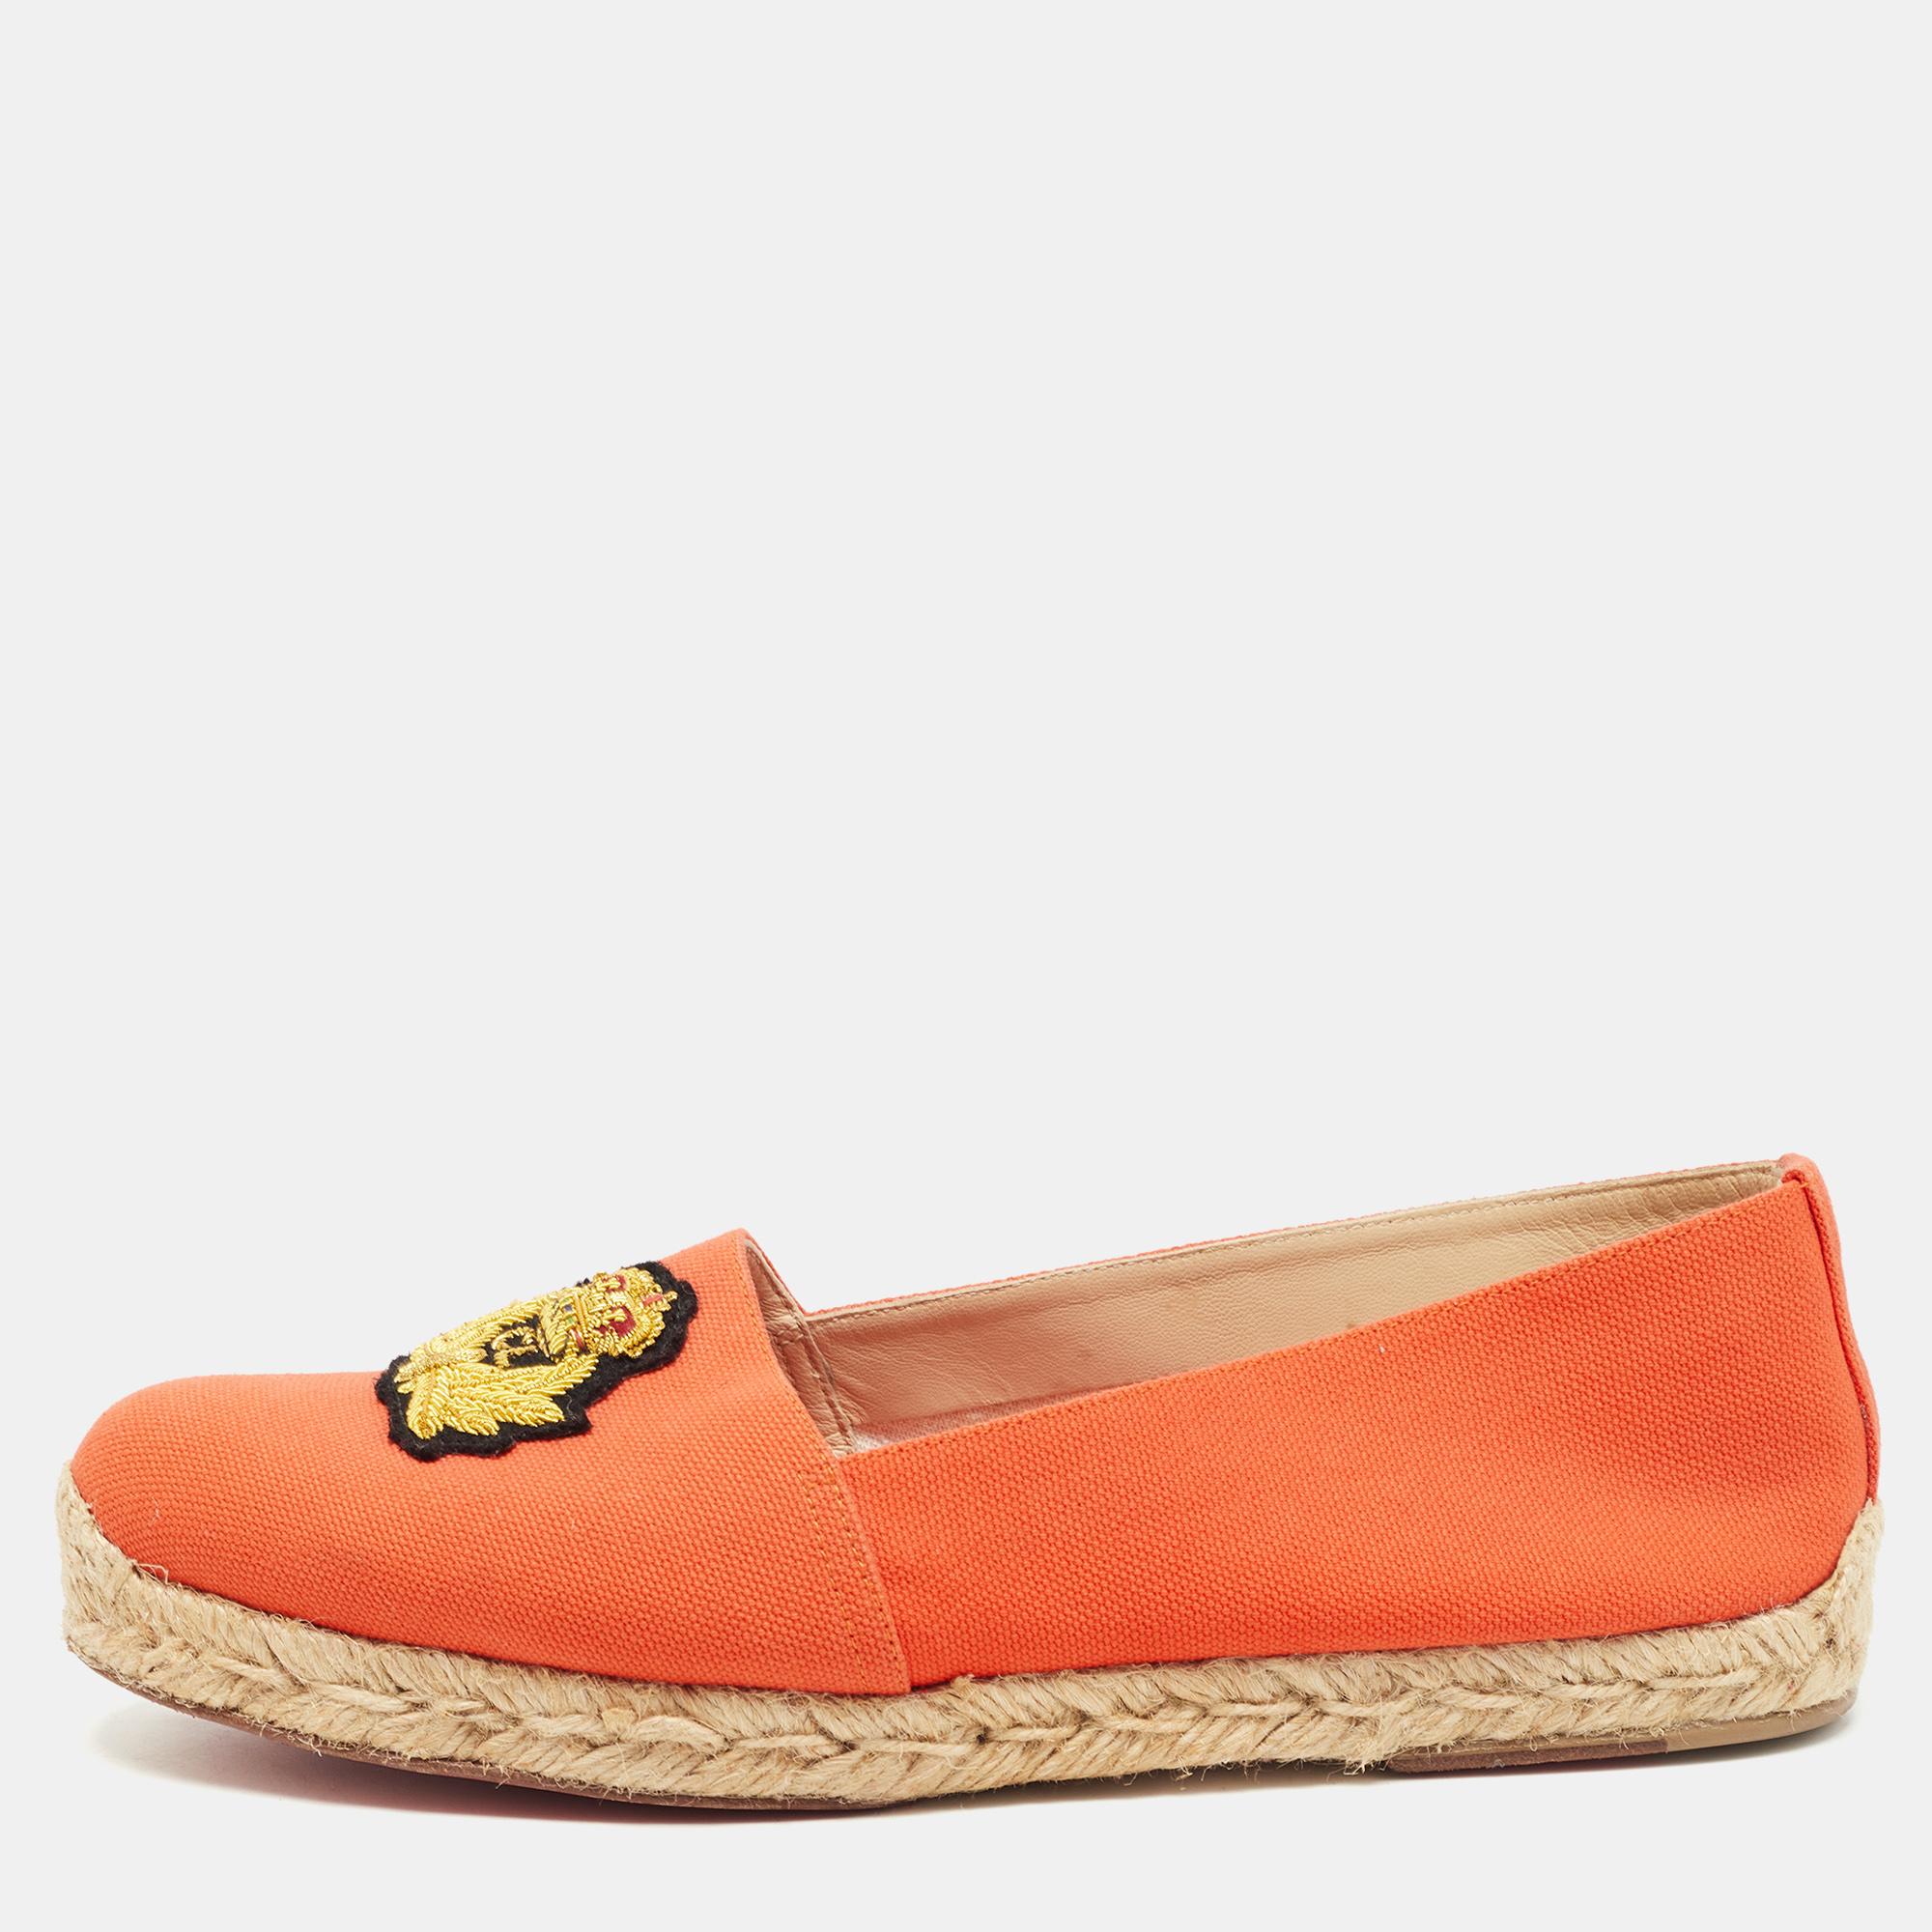 Pre-owned Christian Louboutin Orange Canvas Gala Embroidered Crest Espadrille Loafers Size 38